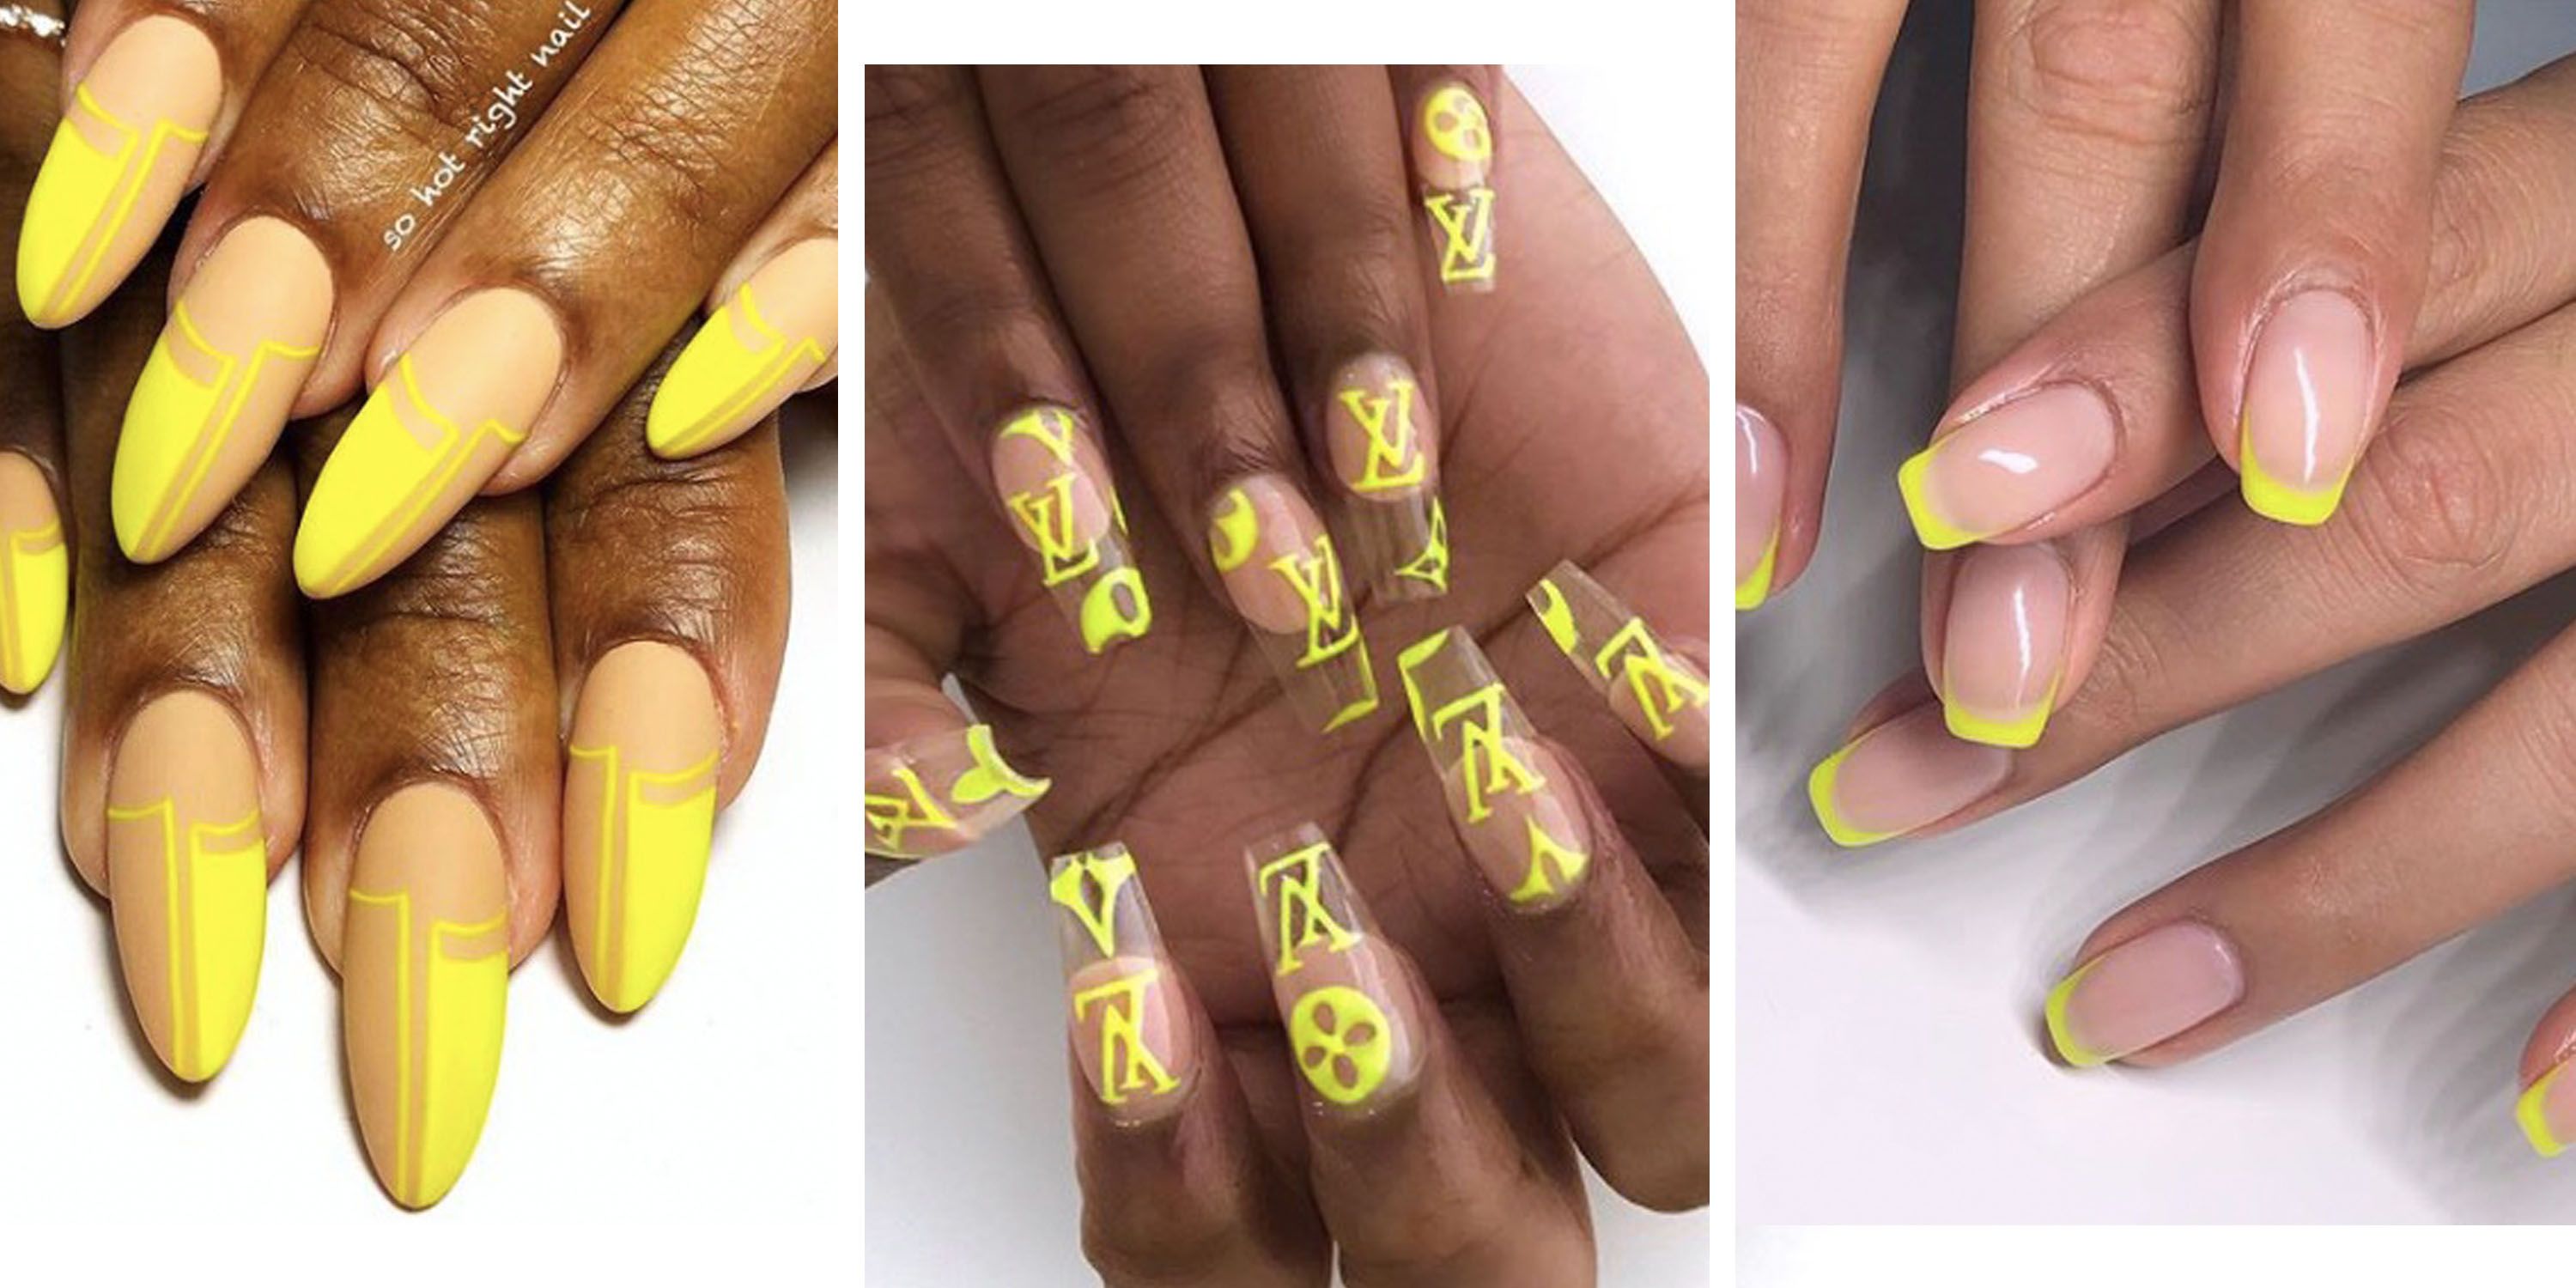 Black And Gold Louis Vuitton Nails :: Keweenaw Bay Indian Community